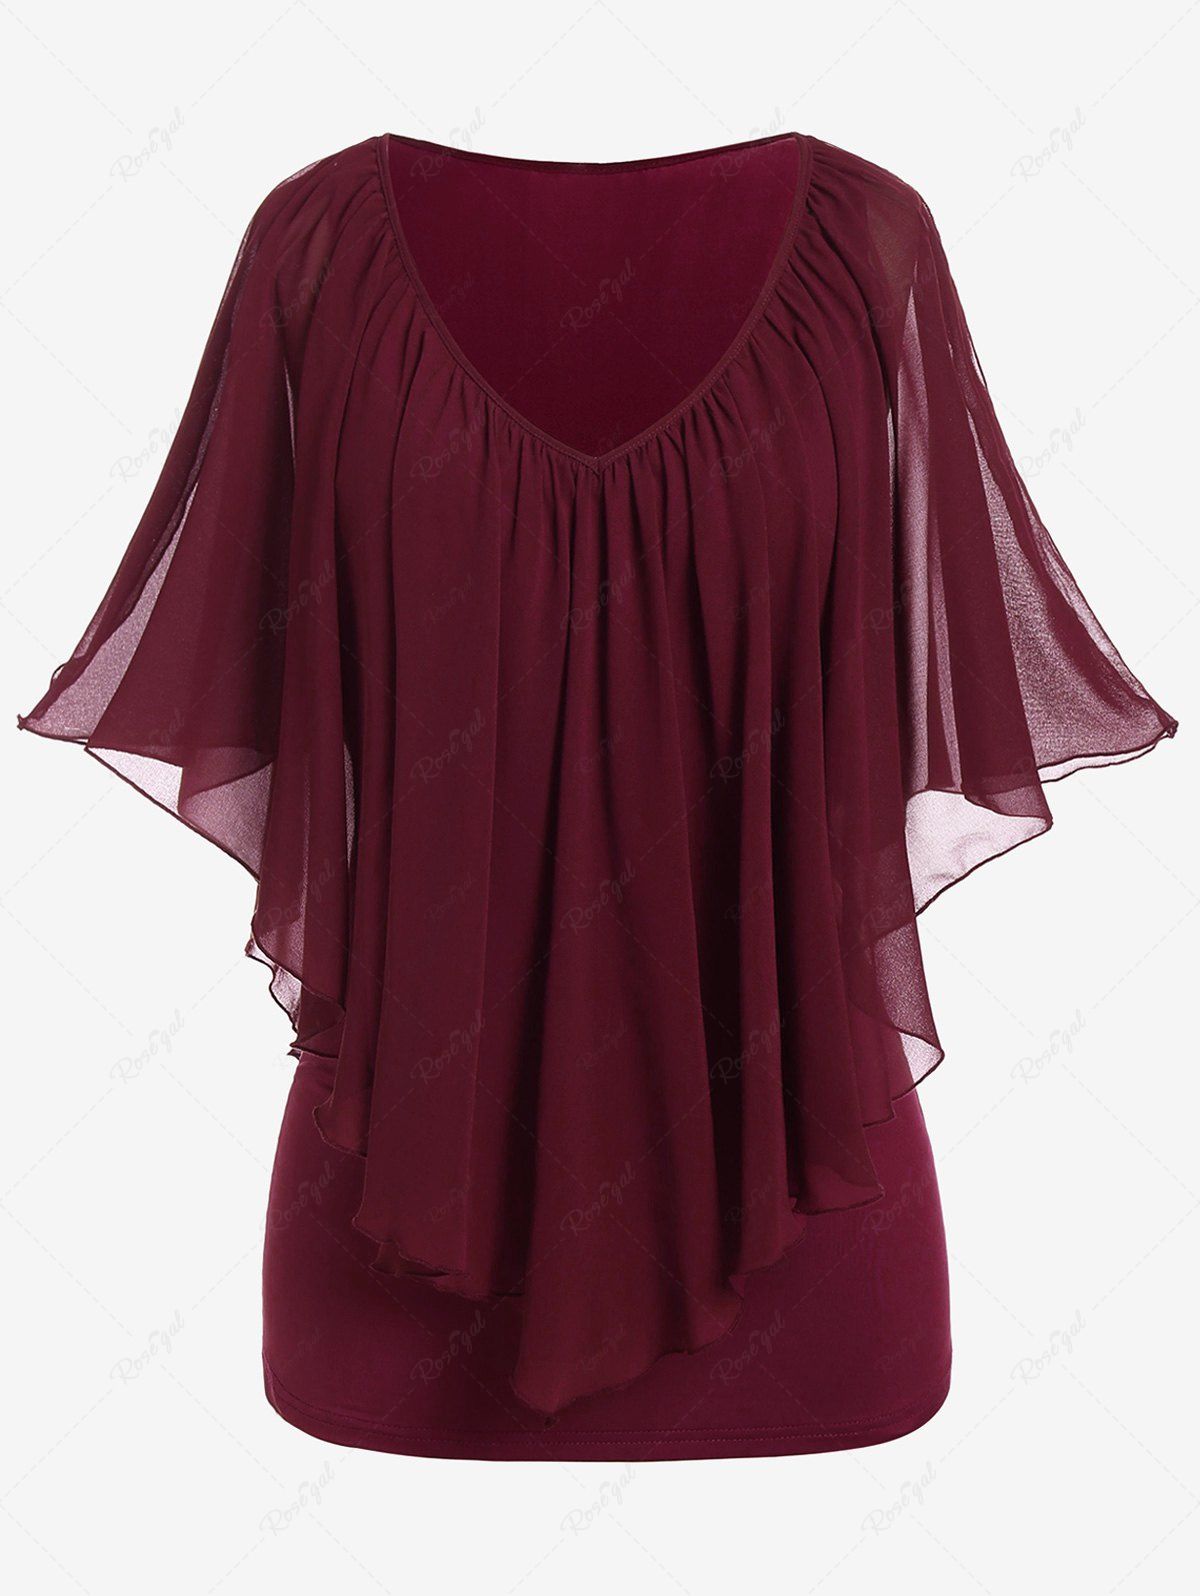 Hot Plus Size Chiffon Overlay Cold Shoulder Tee  